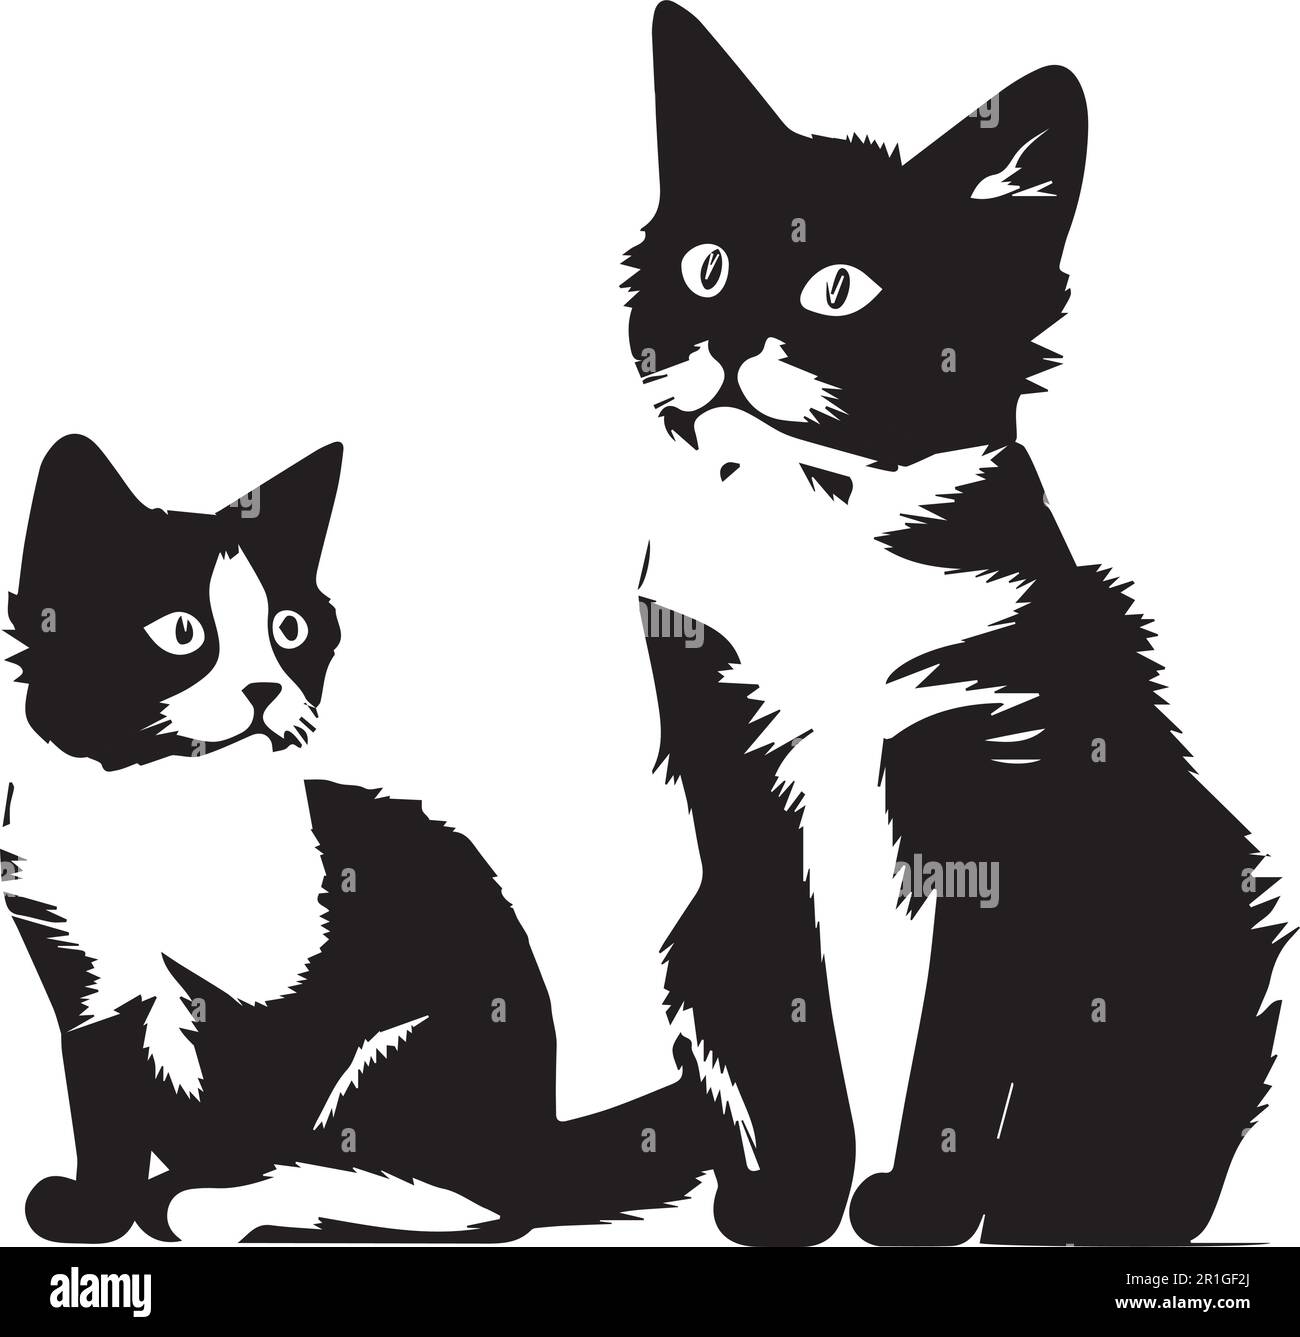 Two cat silhouette cat vector illustration. Stock Vector